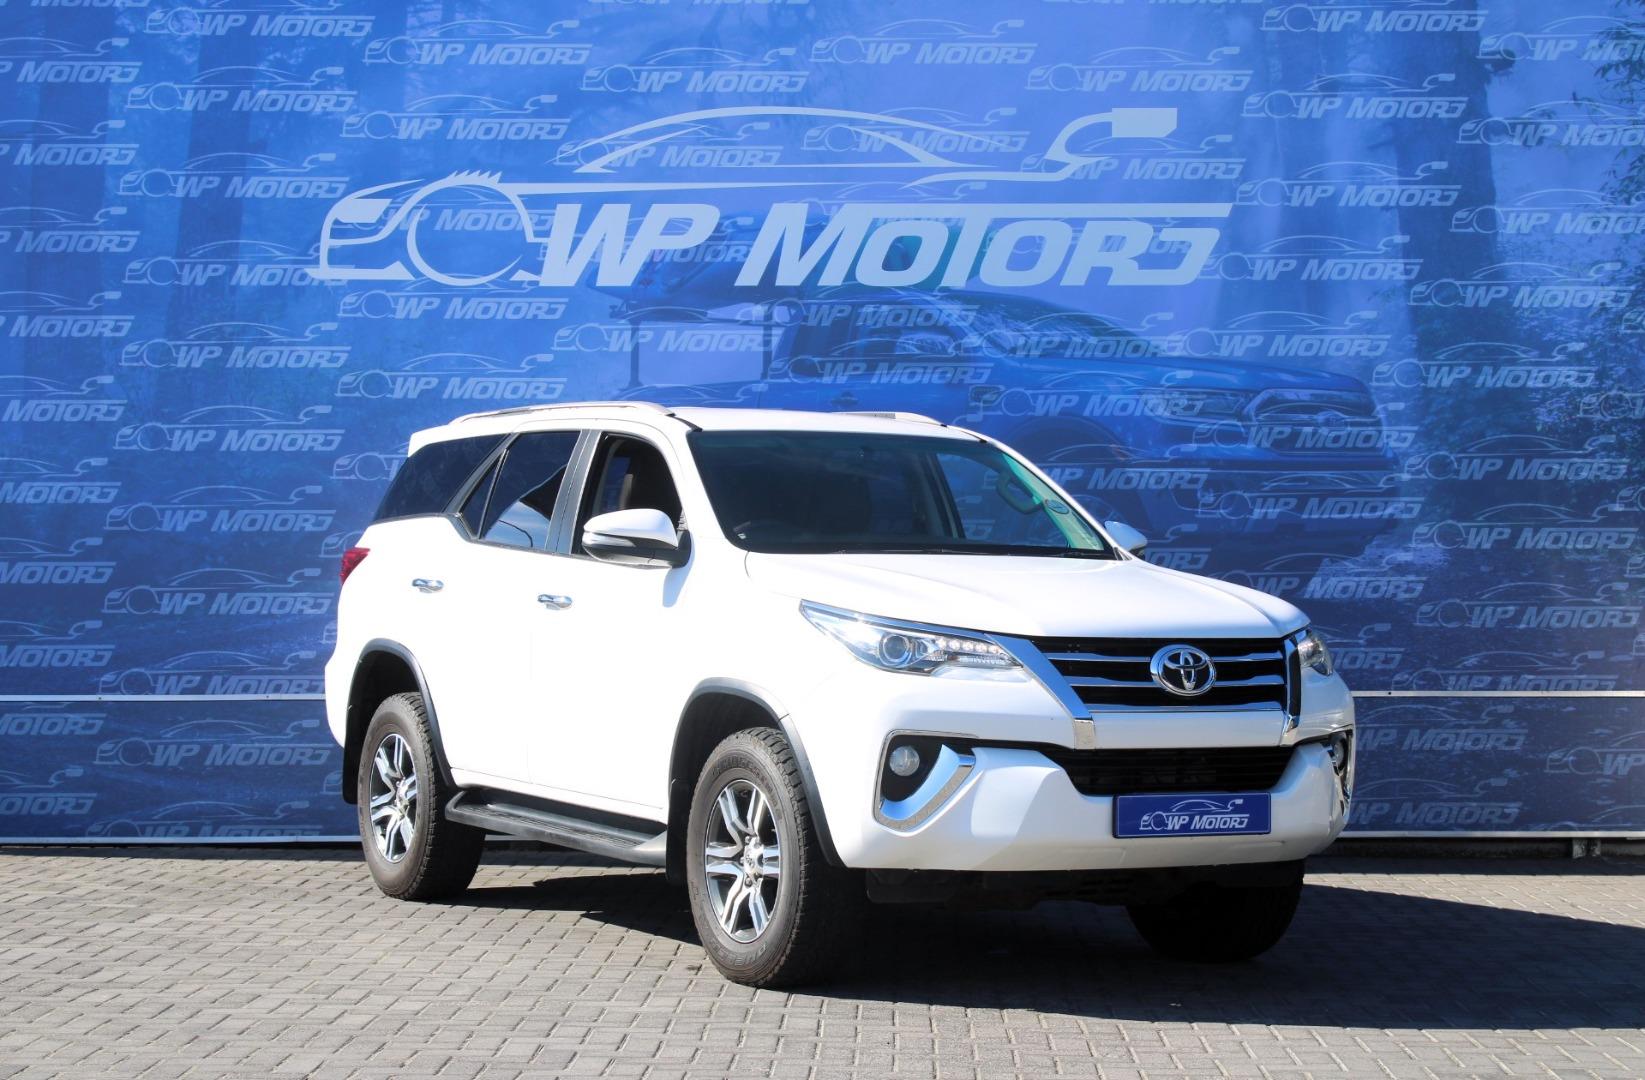 2016 Toyota Fortuner 2.8GD-6 For Sale